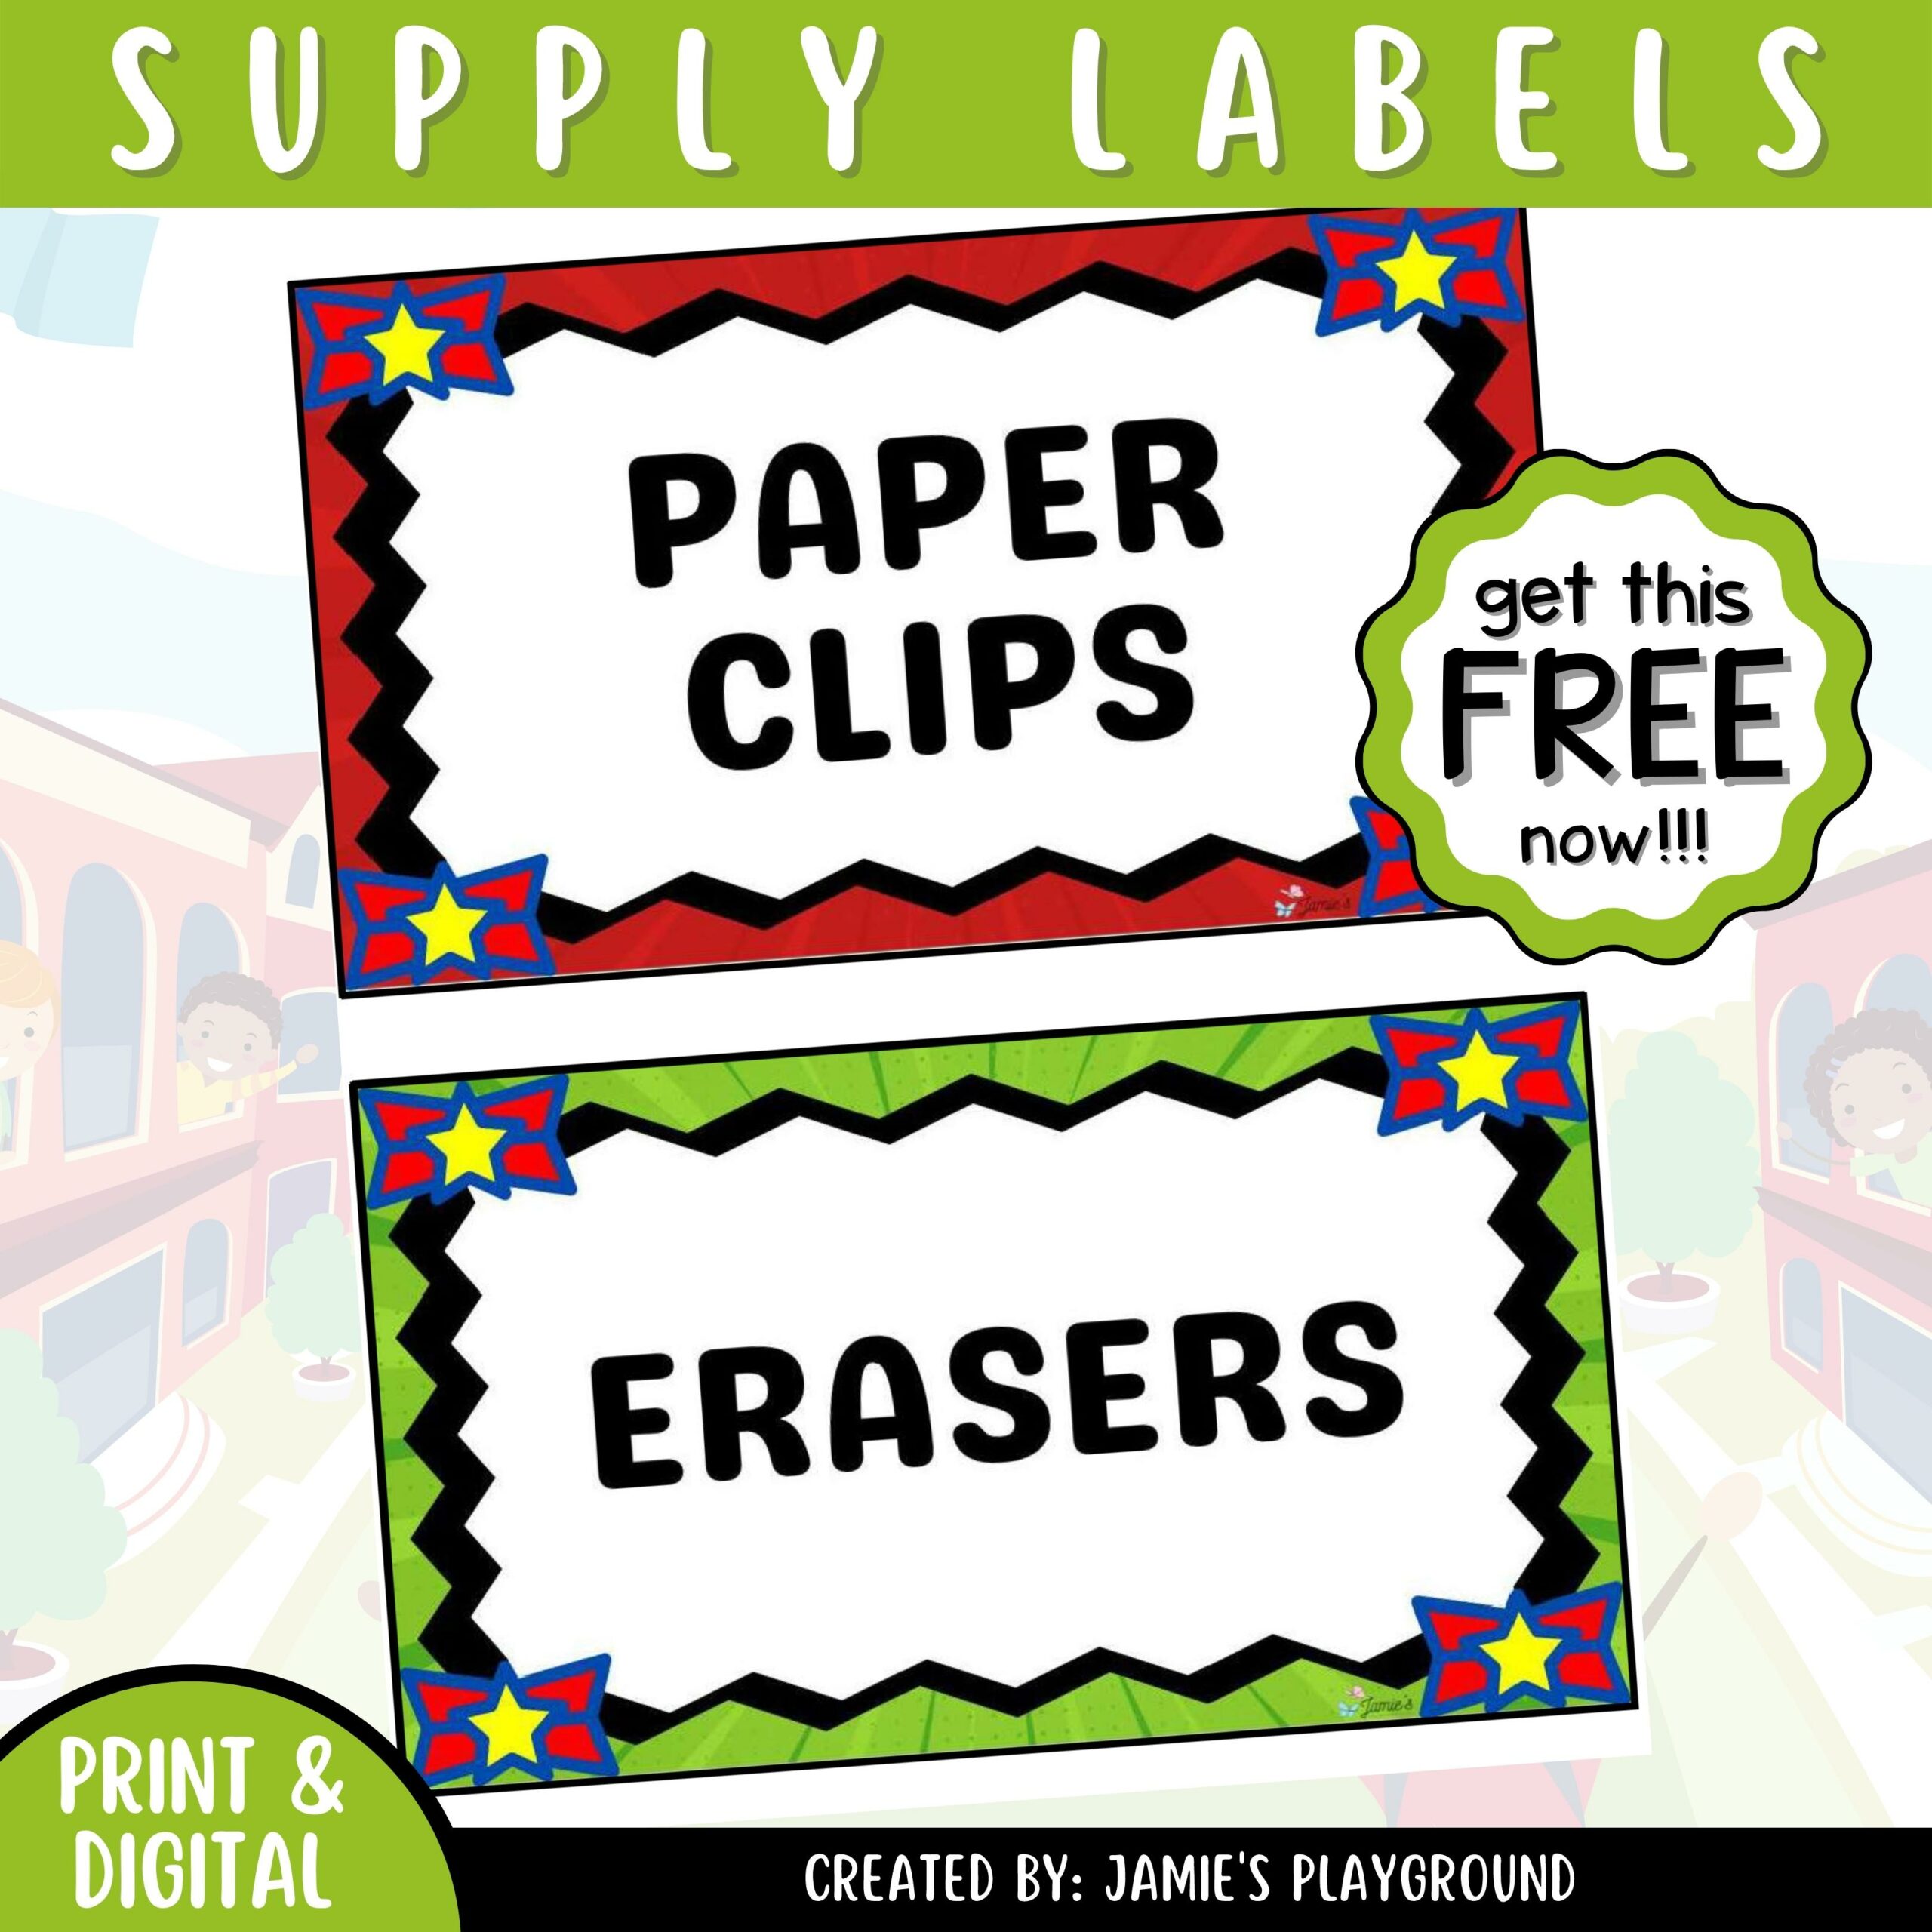 FREE - Classroom Supply Label: Classroom Organization Colorful Supply Label's featured image